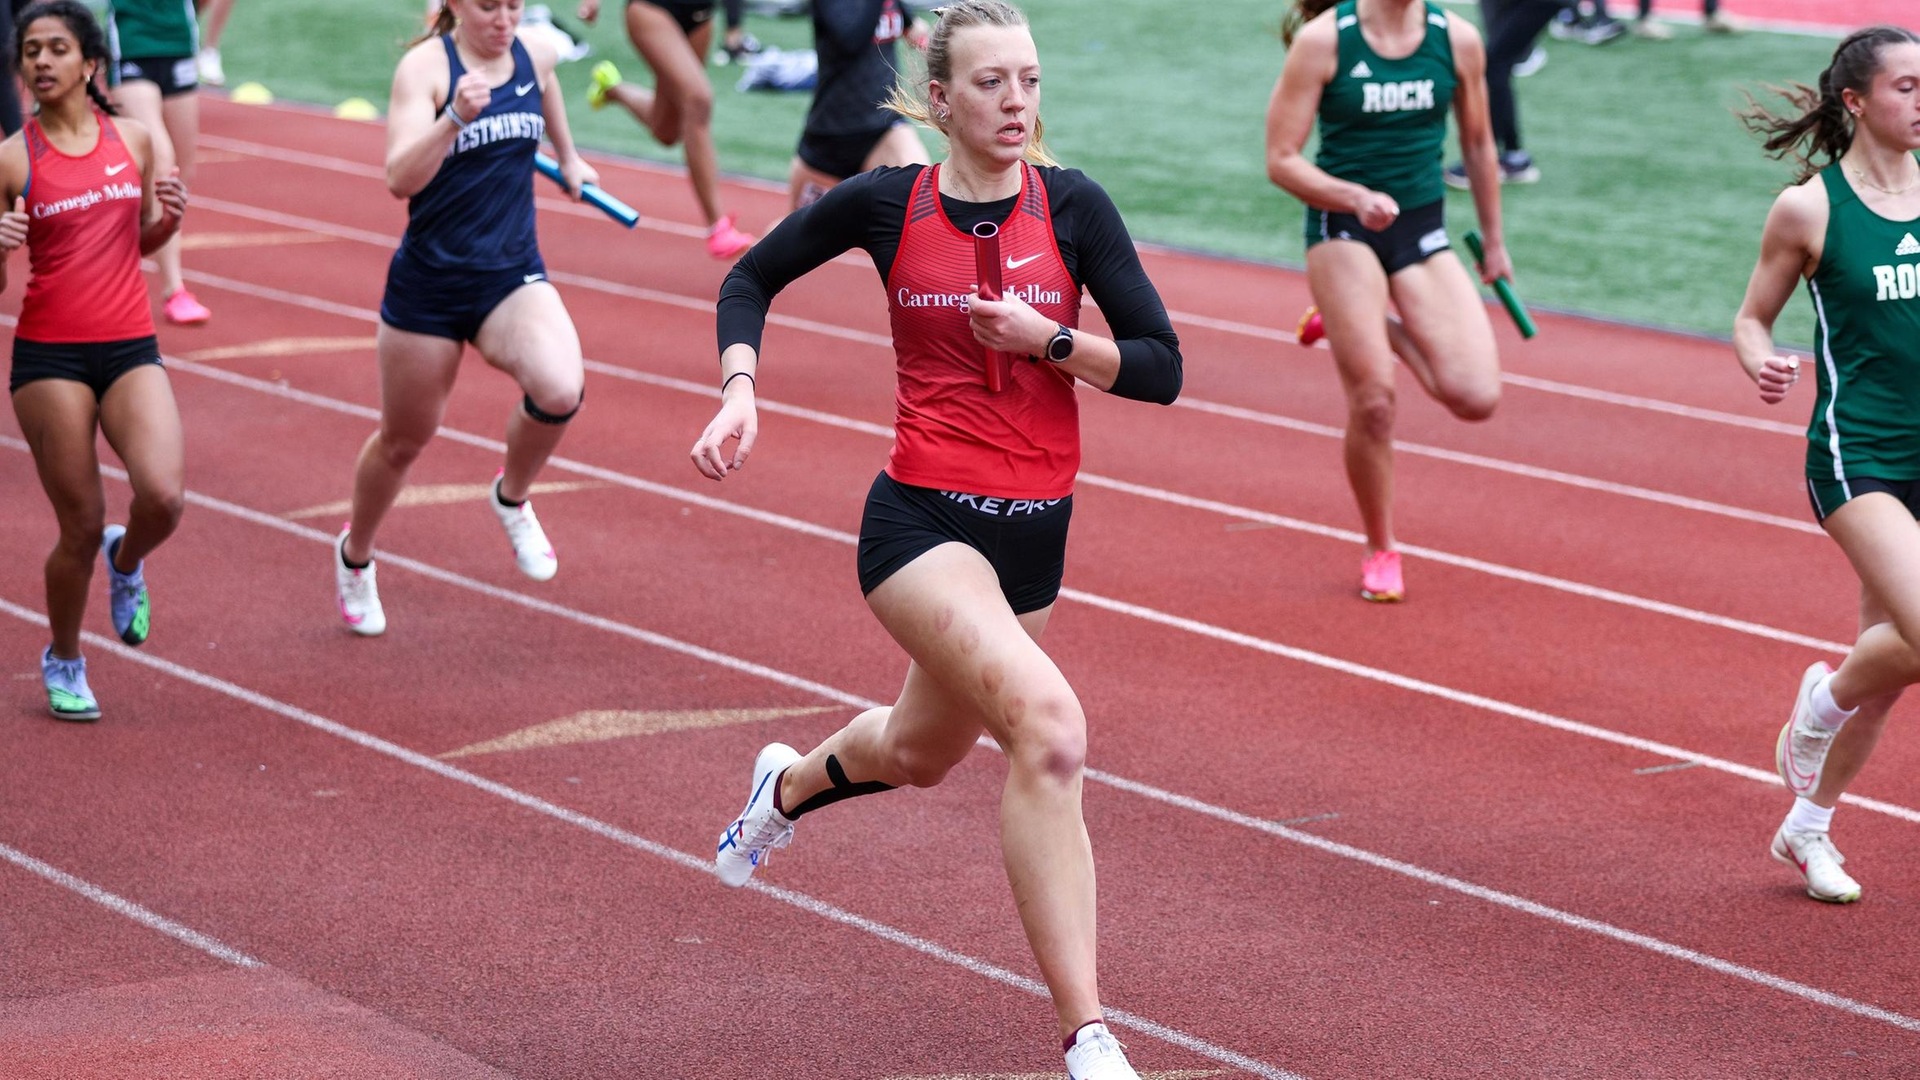 4x400-Meter Relay Ends Tartans Annual Invite With a Victory